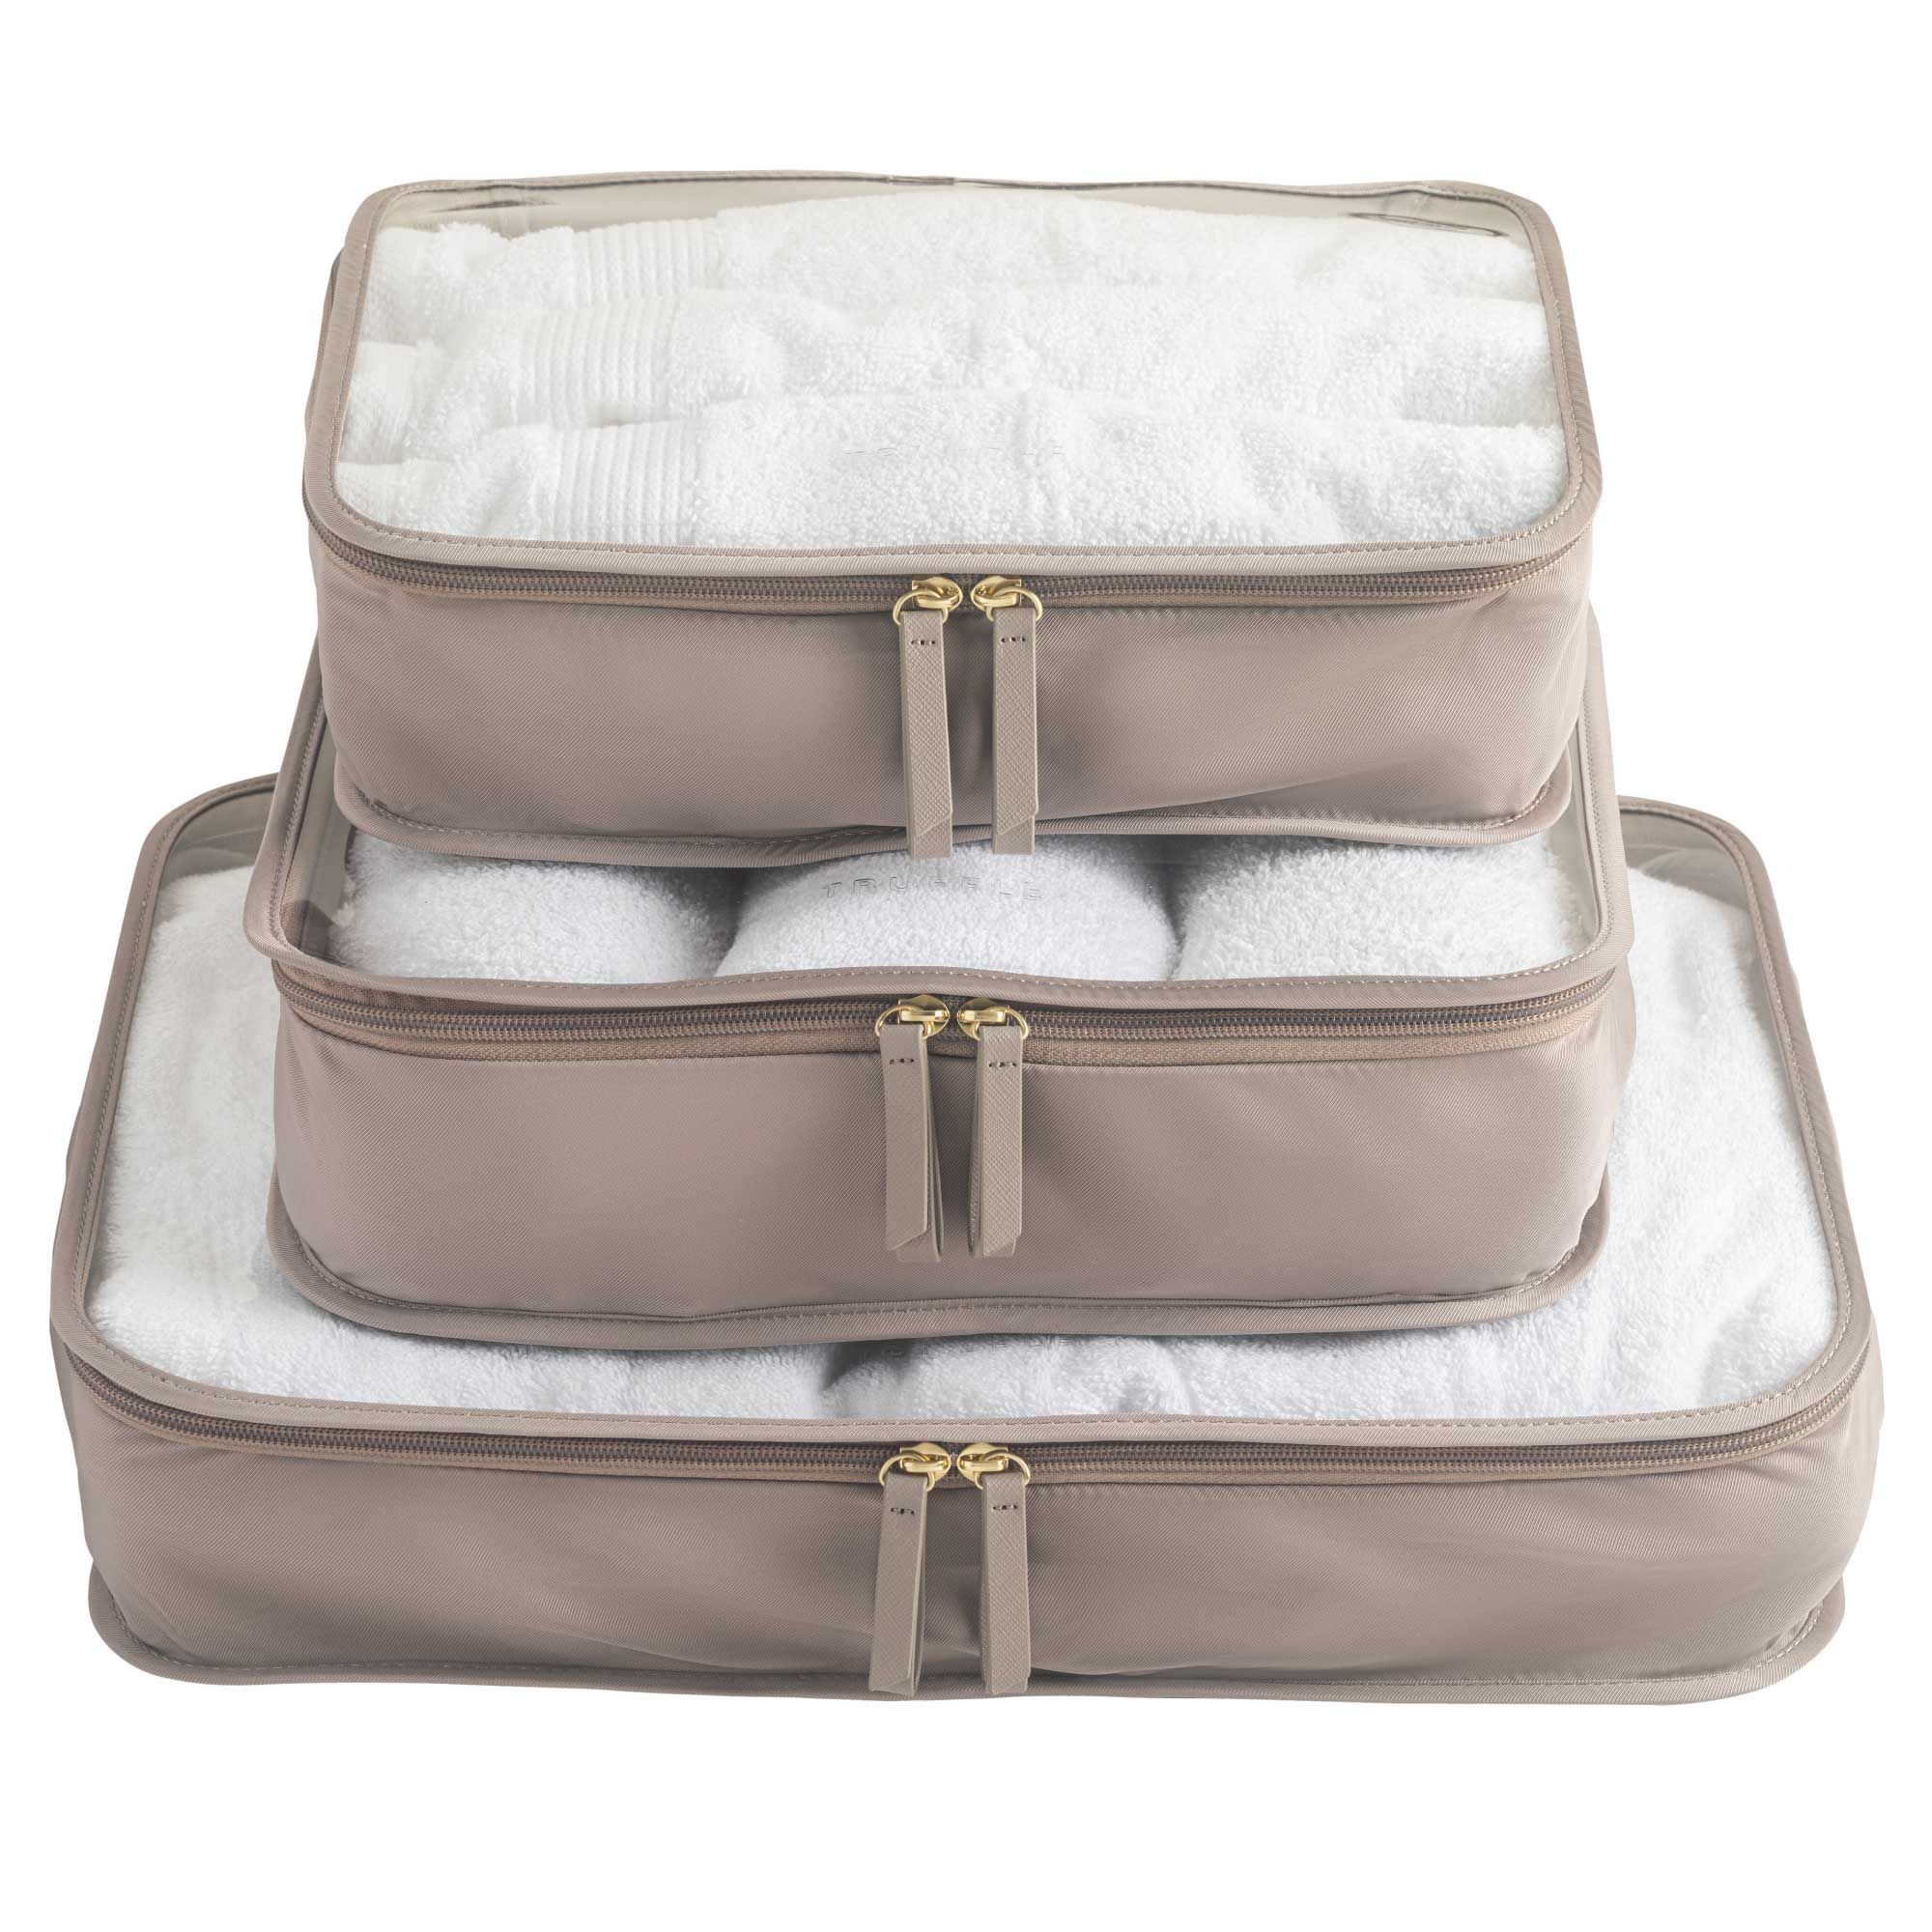 Clarity Packing Cube Trio - See Through Packing Cubes | Truffle | TRUFFLE